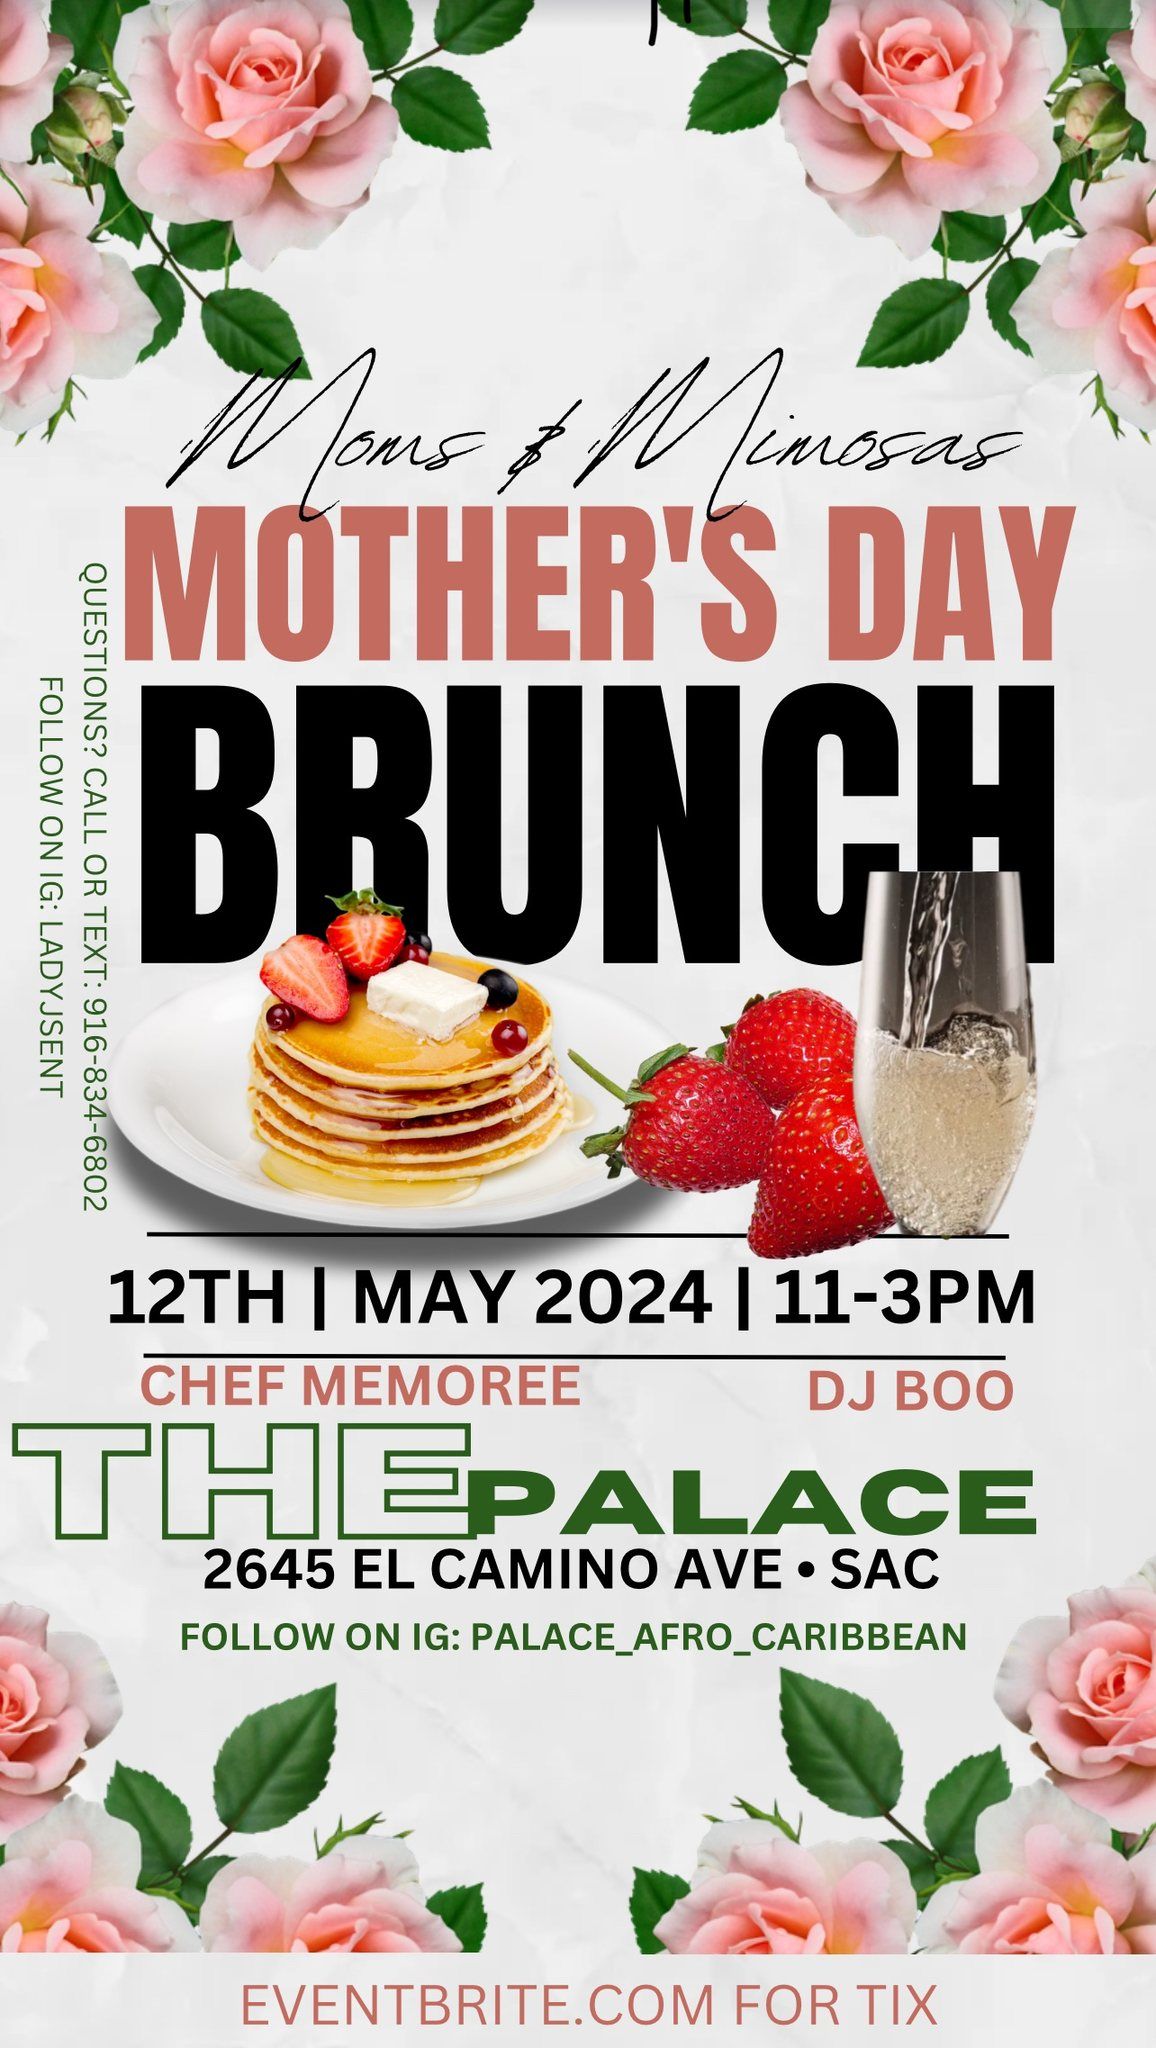 Moms & Mimosas Mothers DayBrunch